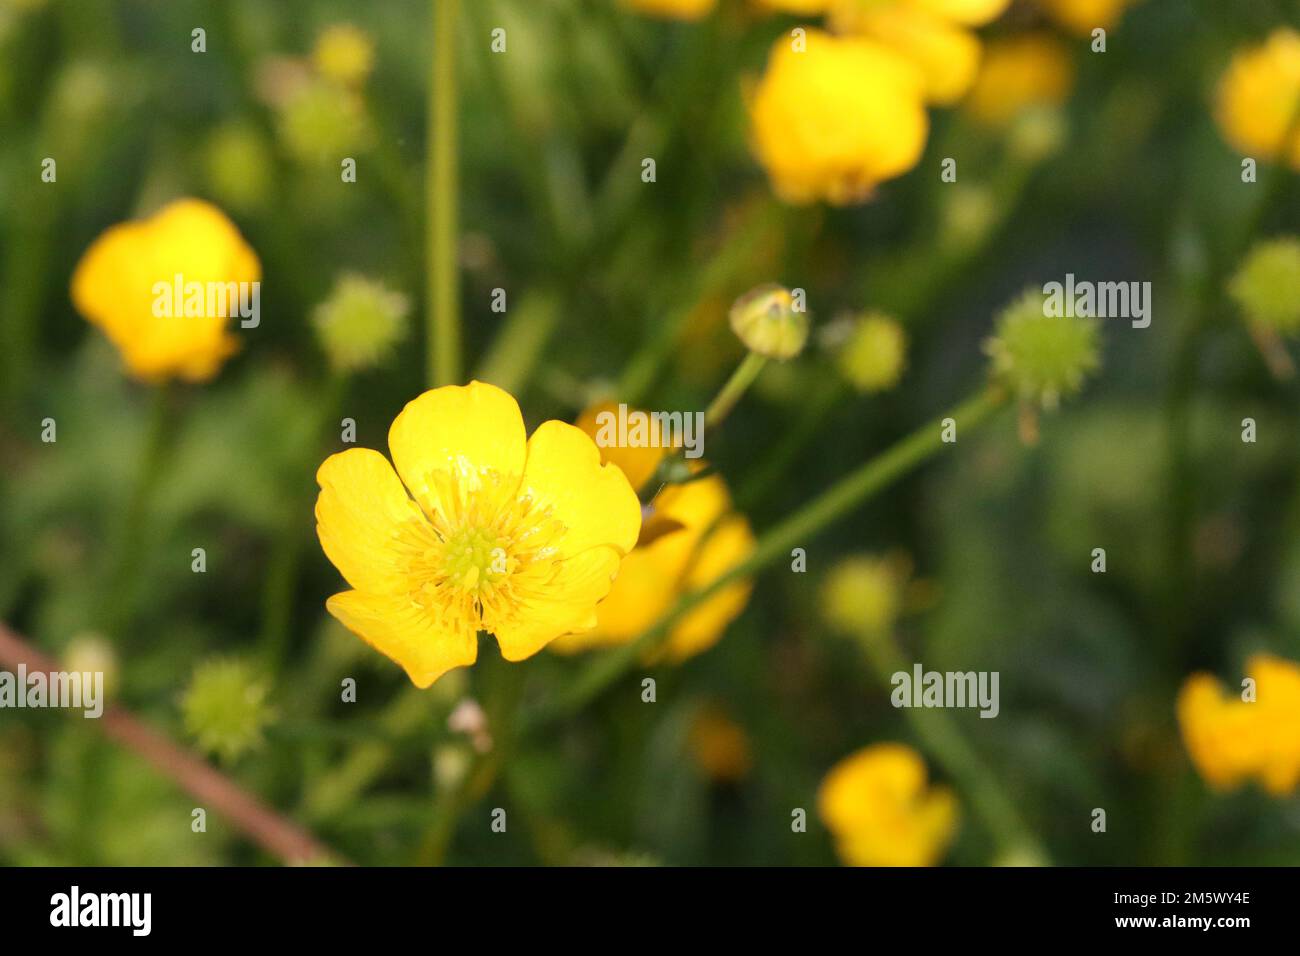 A closeup shot of a yellow celery-leaved buttercup in a garden in daylight on a blurred background Stock Photo